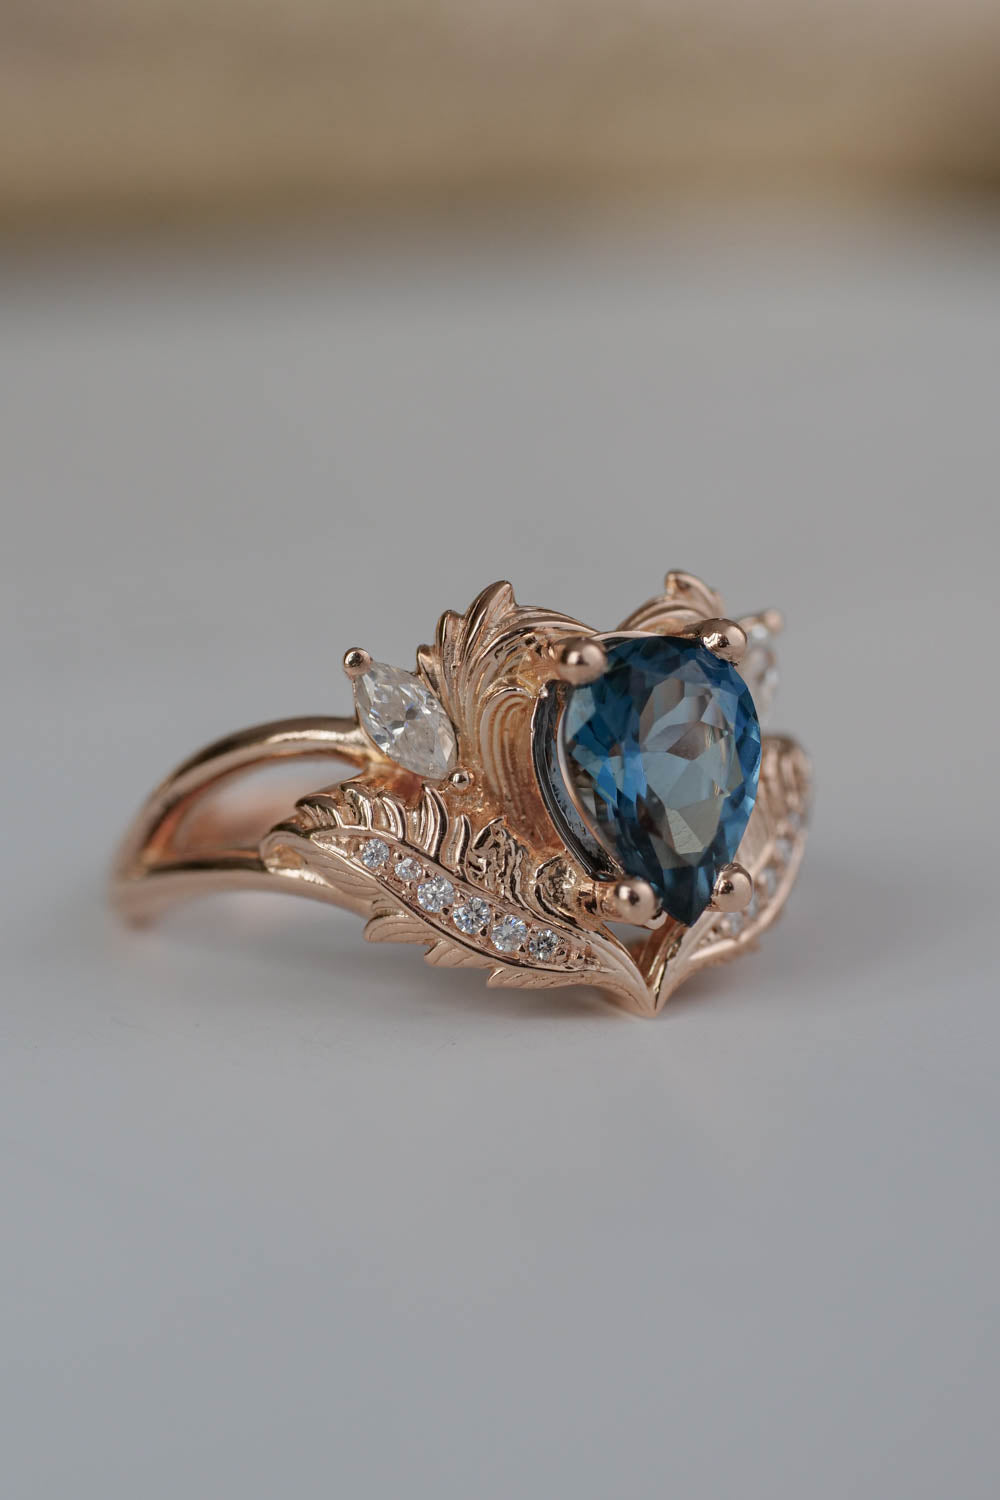 Vintage inspired rings with blue topaz / Adonis - Eden Garden Jewelry™